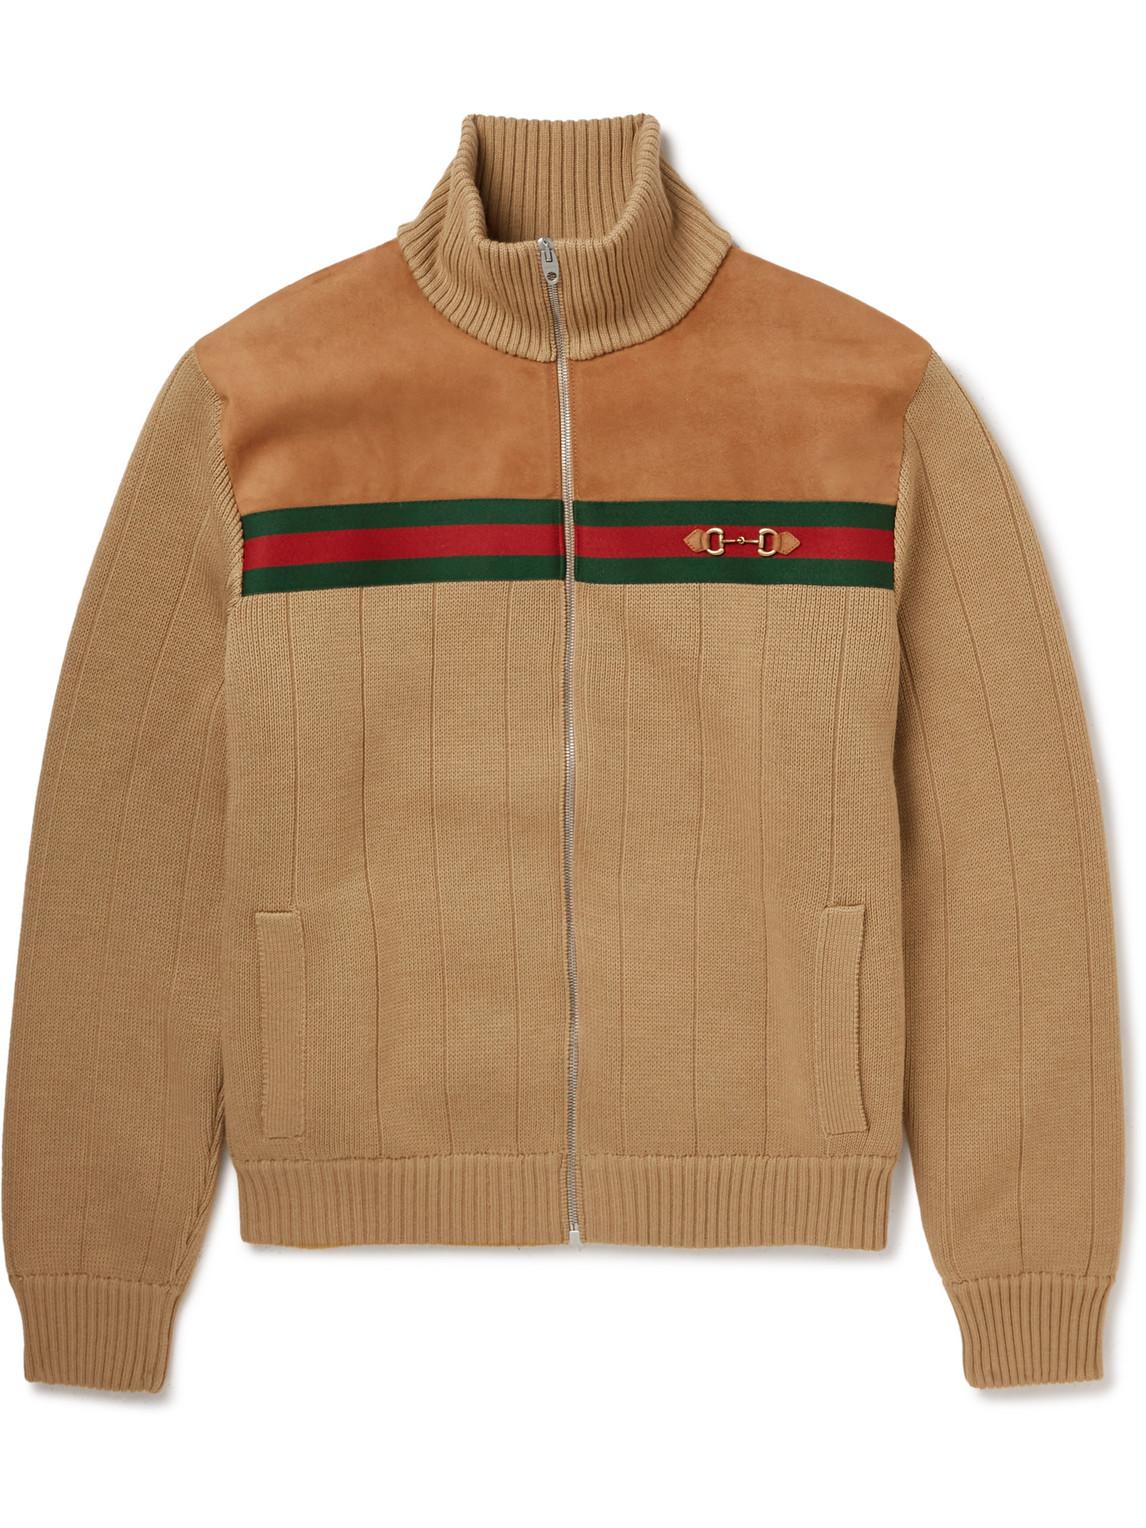 Gucci Webbing-trimmed Suede-panelled Wool Bomber Jacket in Brown